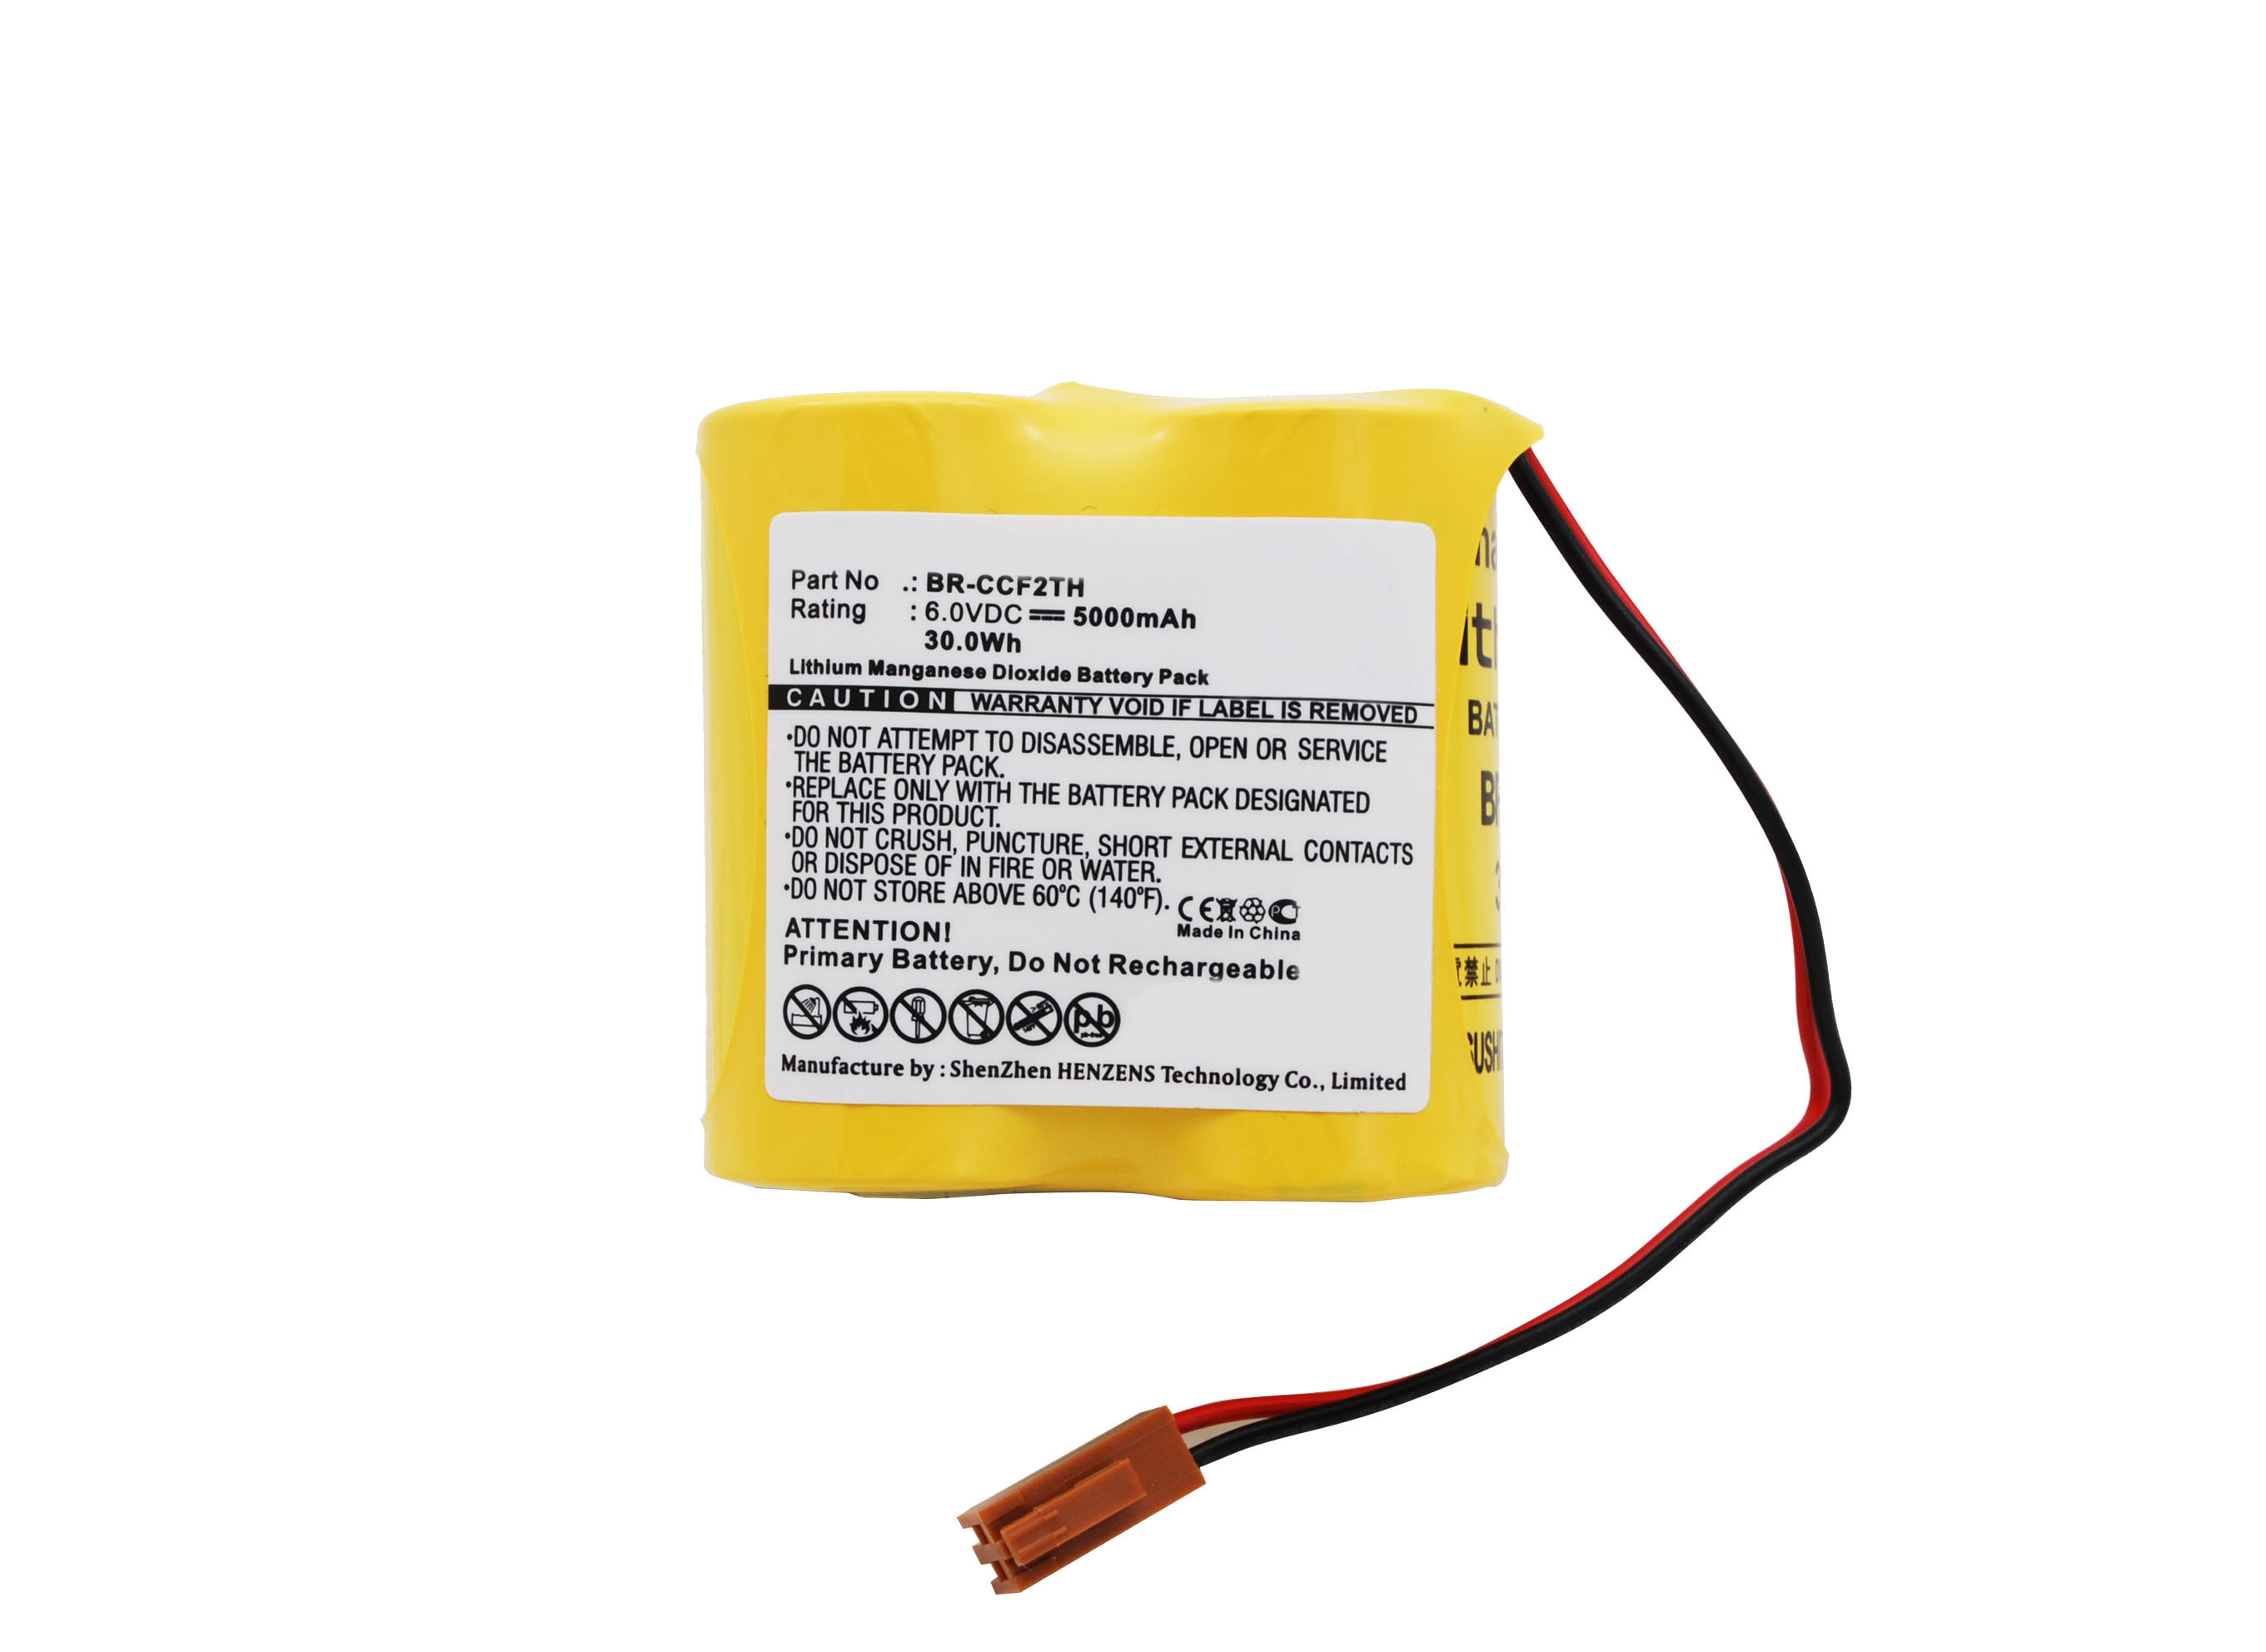 Synergy Digital Battery Compatible With Cutler Hammer A06B-0073-K001 Replacement Battery - (Li-MnO2, 6V, 5000 mAh)